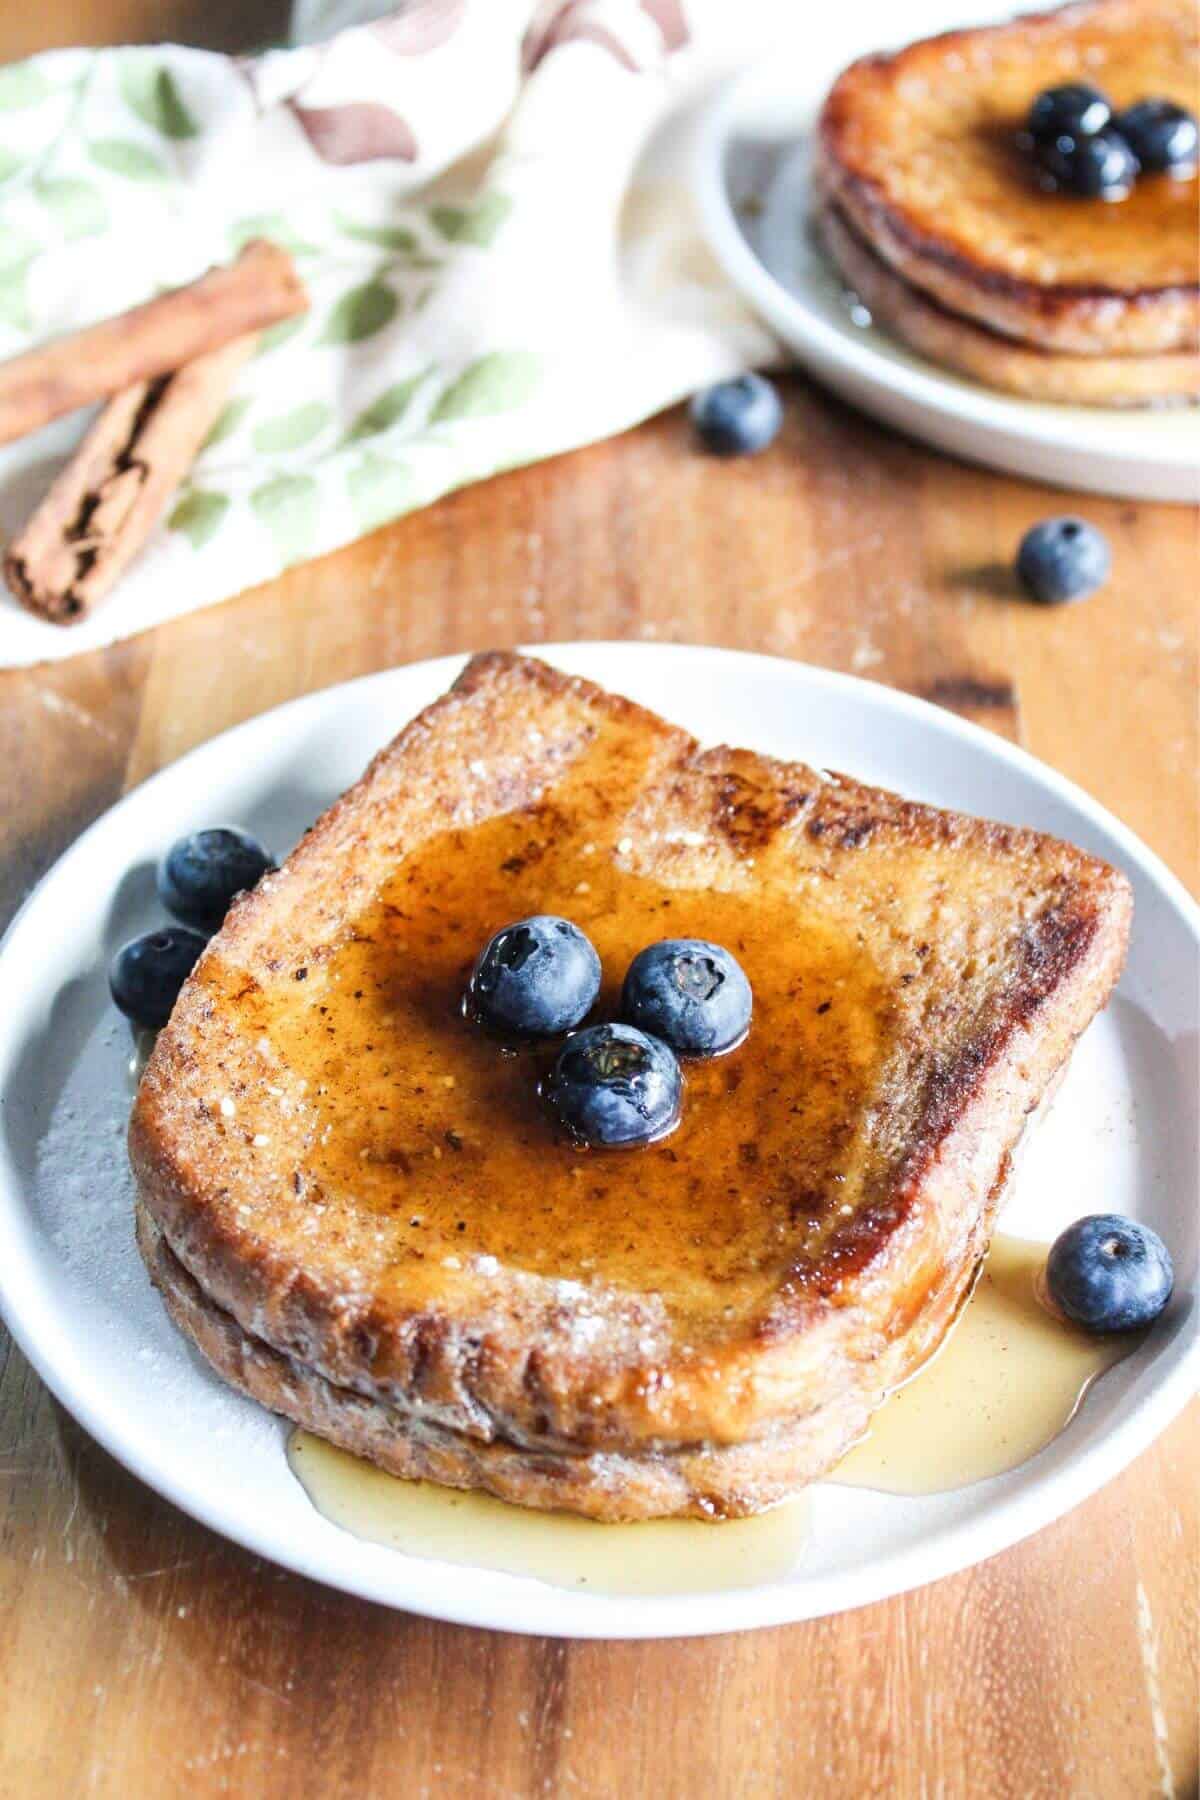 French toast served with syrup and blueberries.